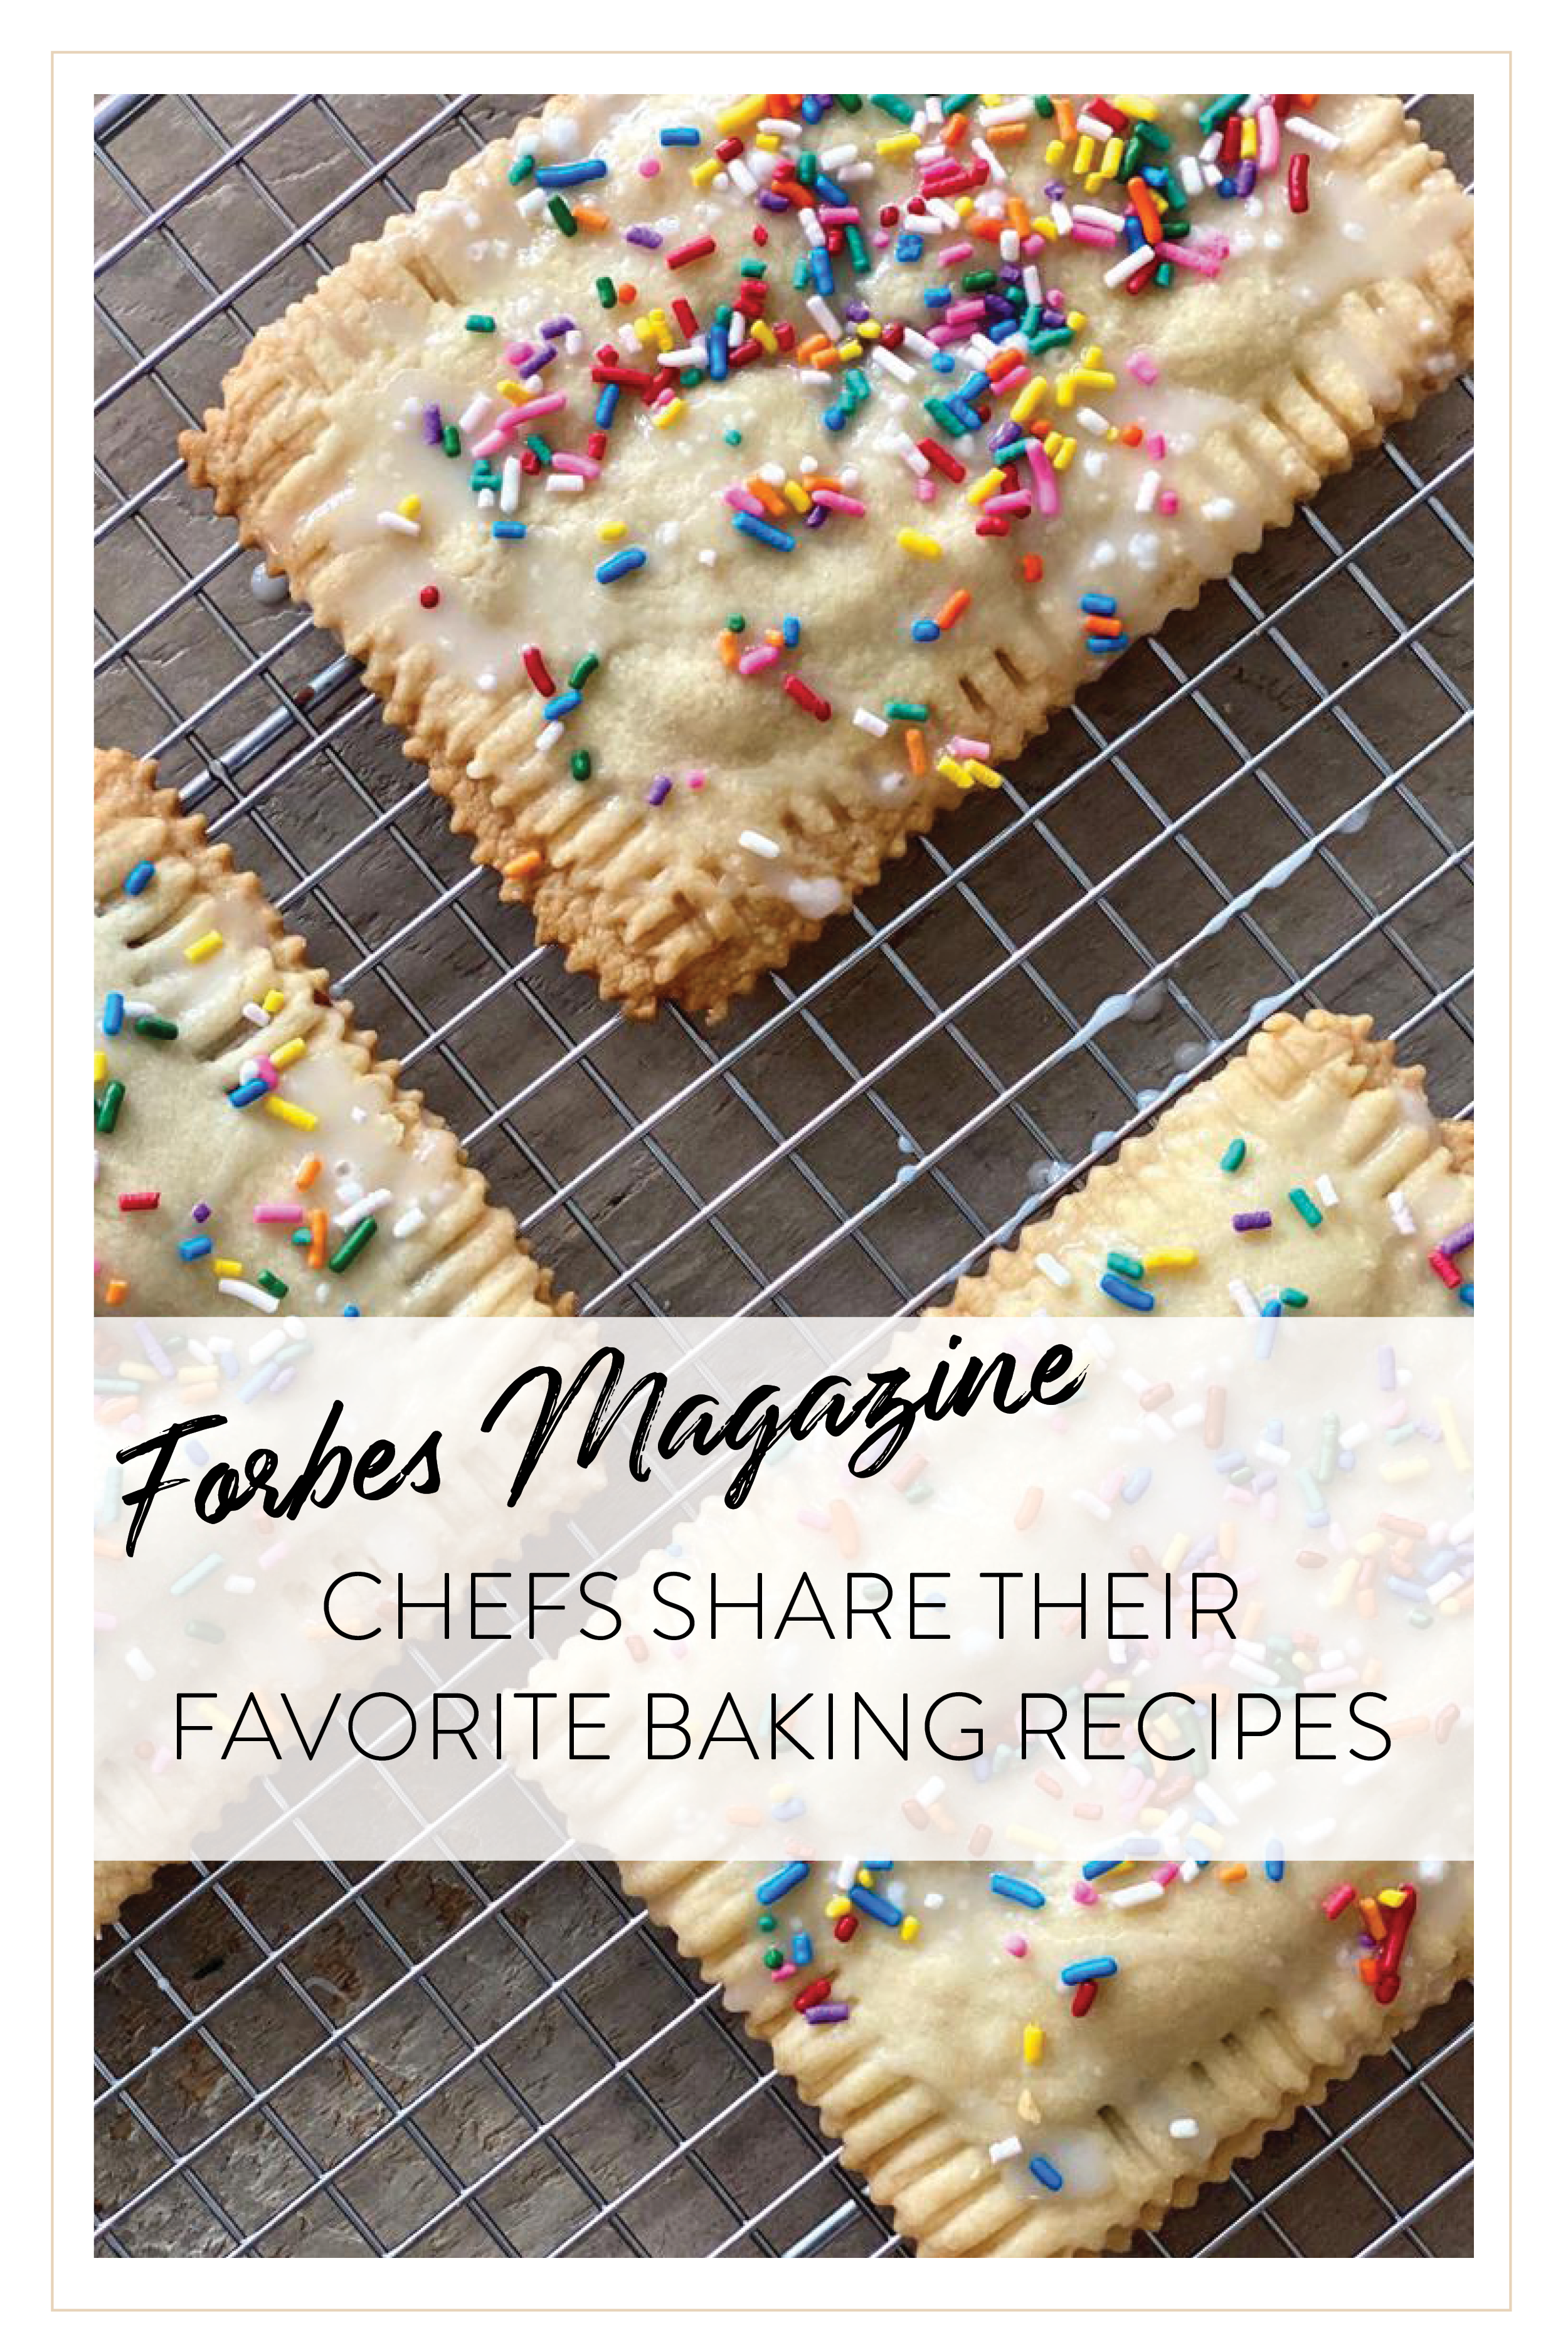 Forbes Magazine Chefs Share Their Favorite Baking Recipes